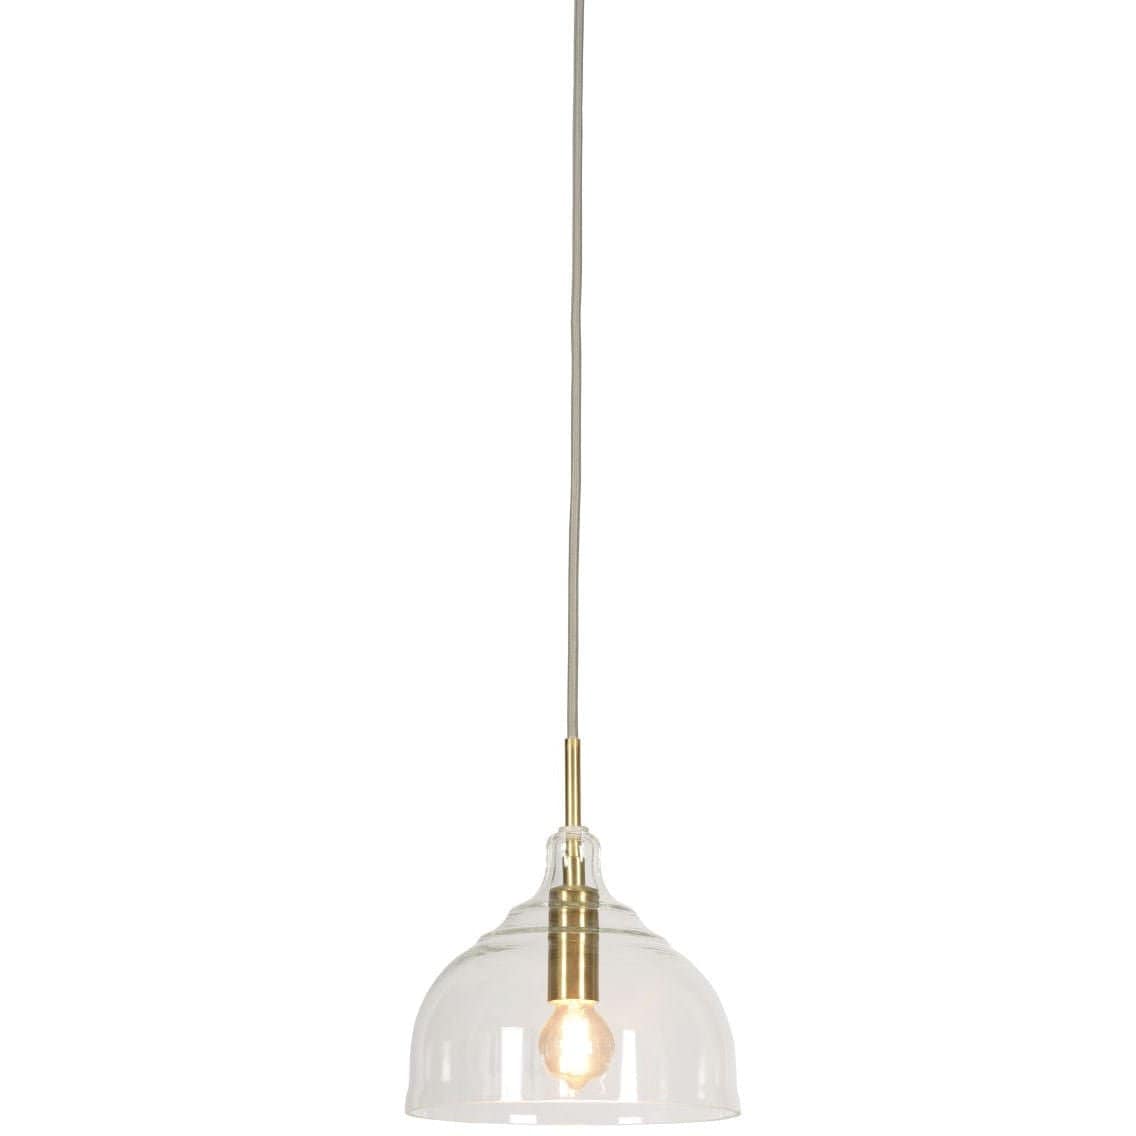 It's About RoMi Pendant lights Brussels Round Glass Pendant Light